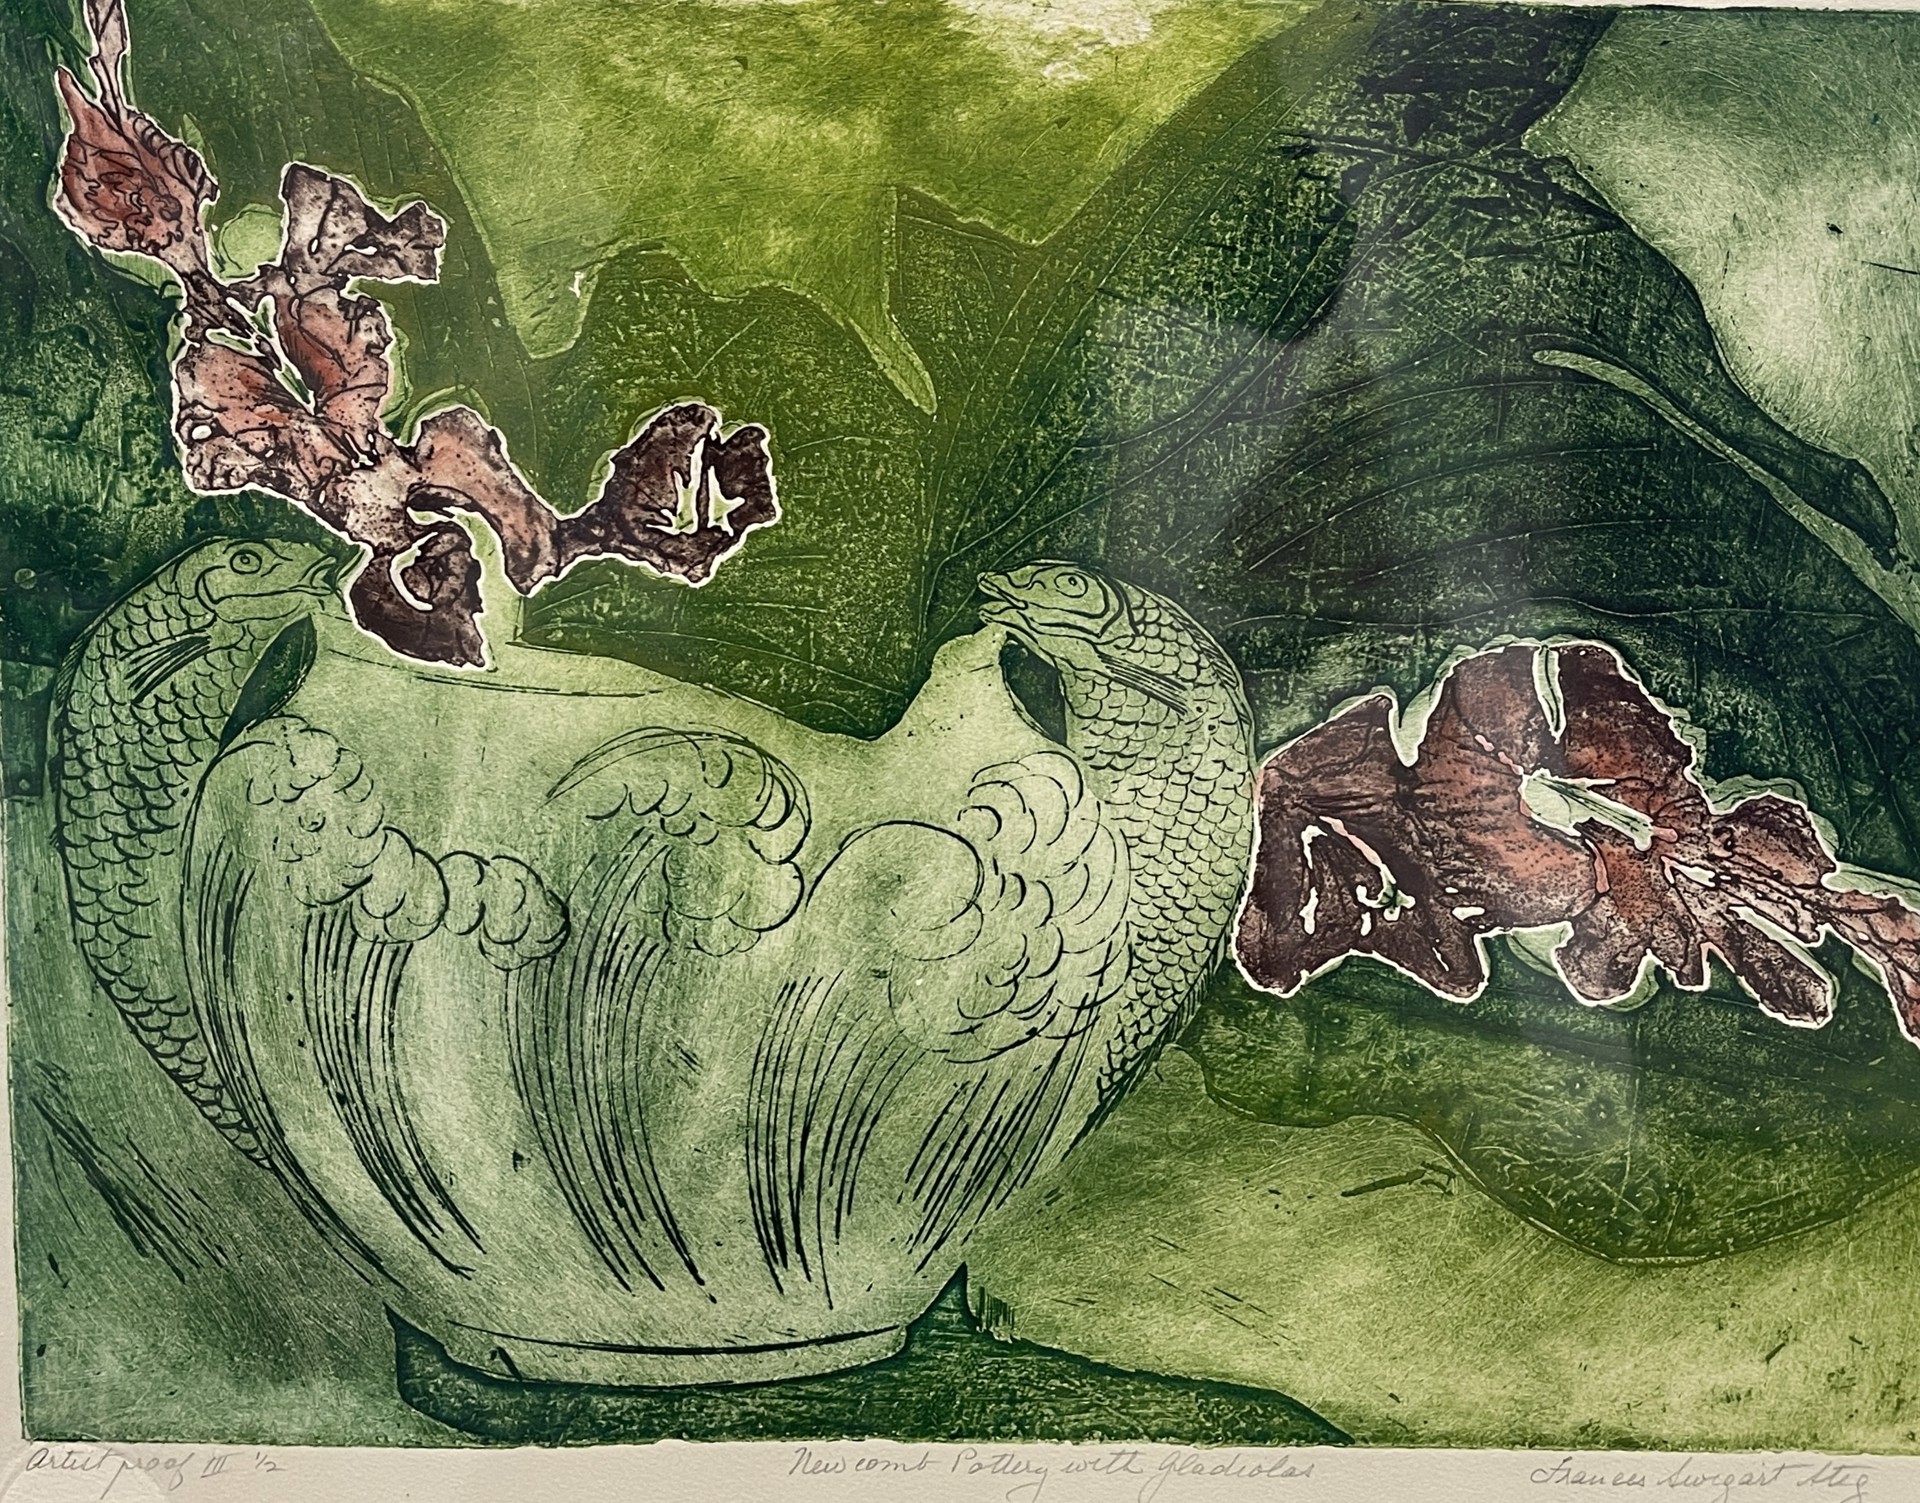 Newcomb Pottery with Gladiolas (A.P III 1/2) by Frances Swigart